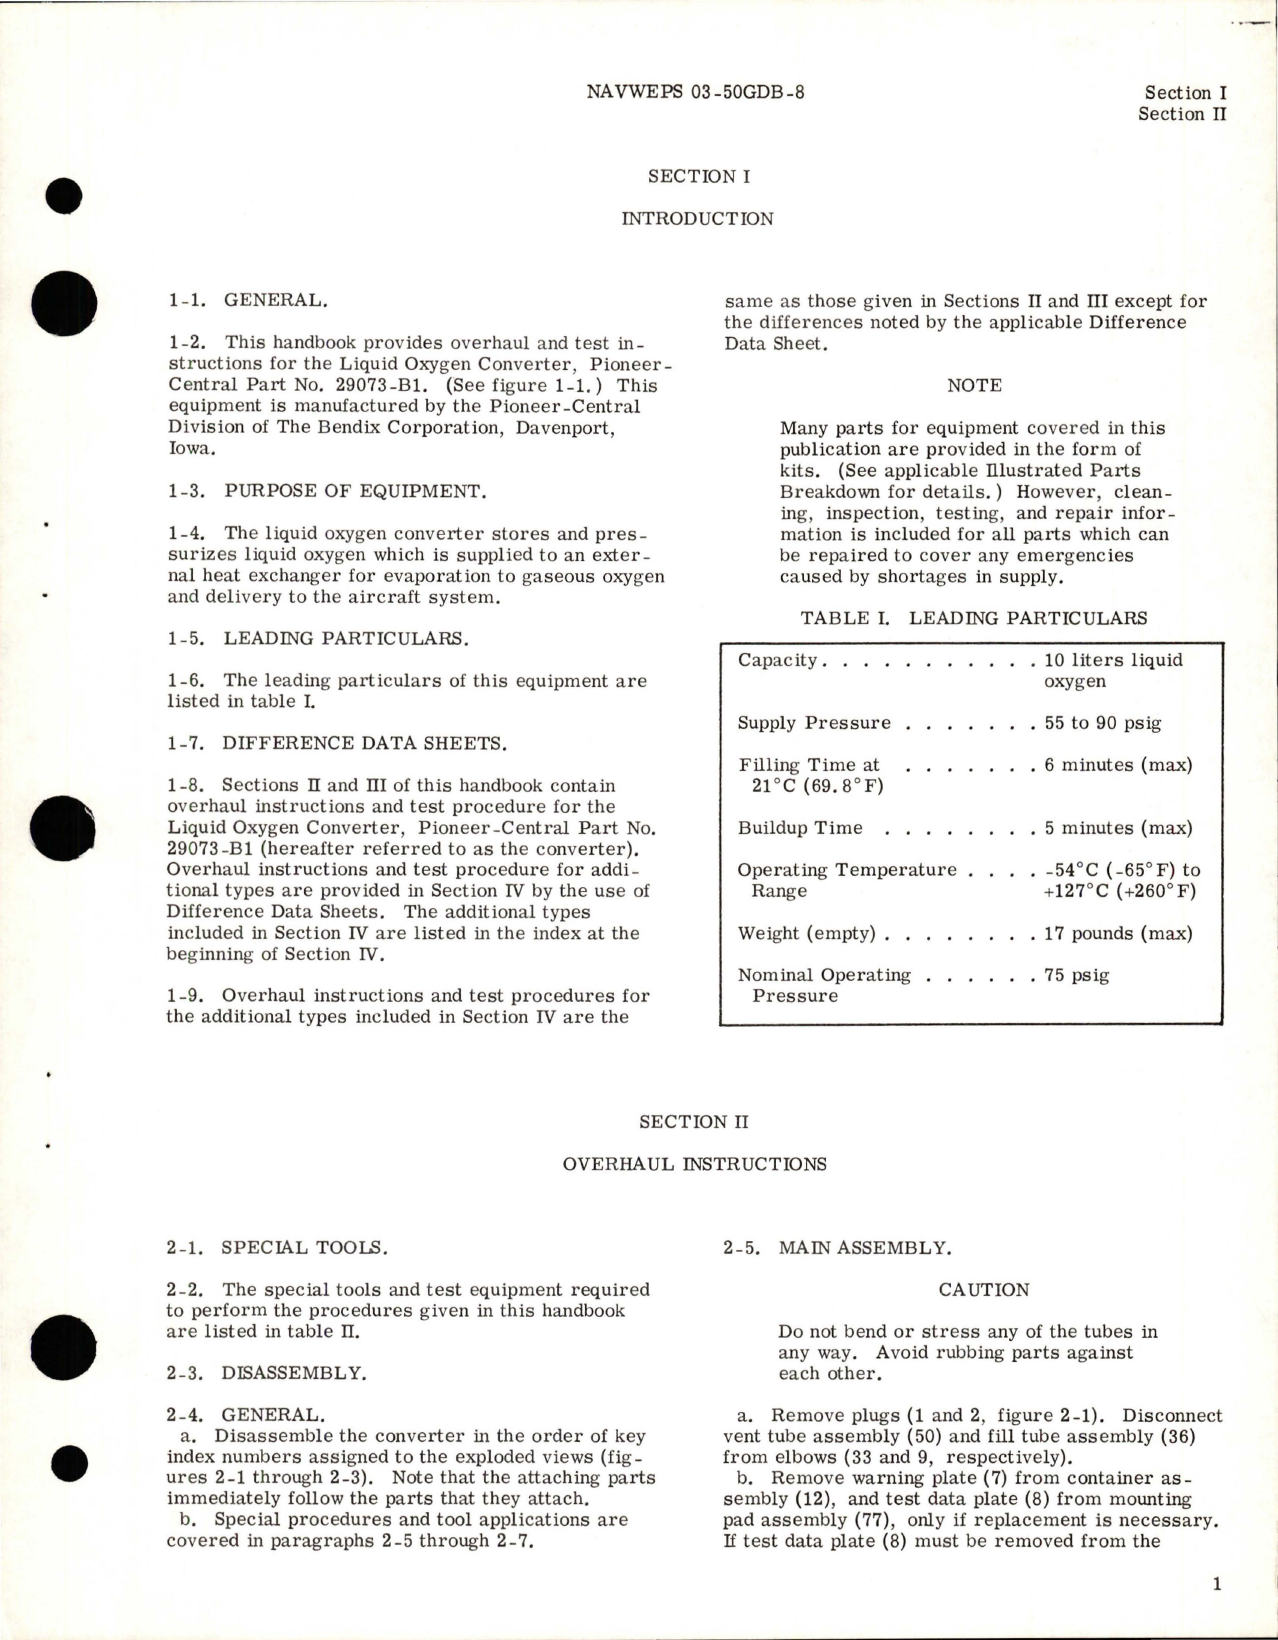 Sample page 5 from AirCorps Library document: Overhaul Instructions for Liquid Oxygen Converter - Part 29073-B1 and 29073-C1